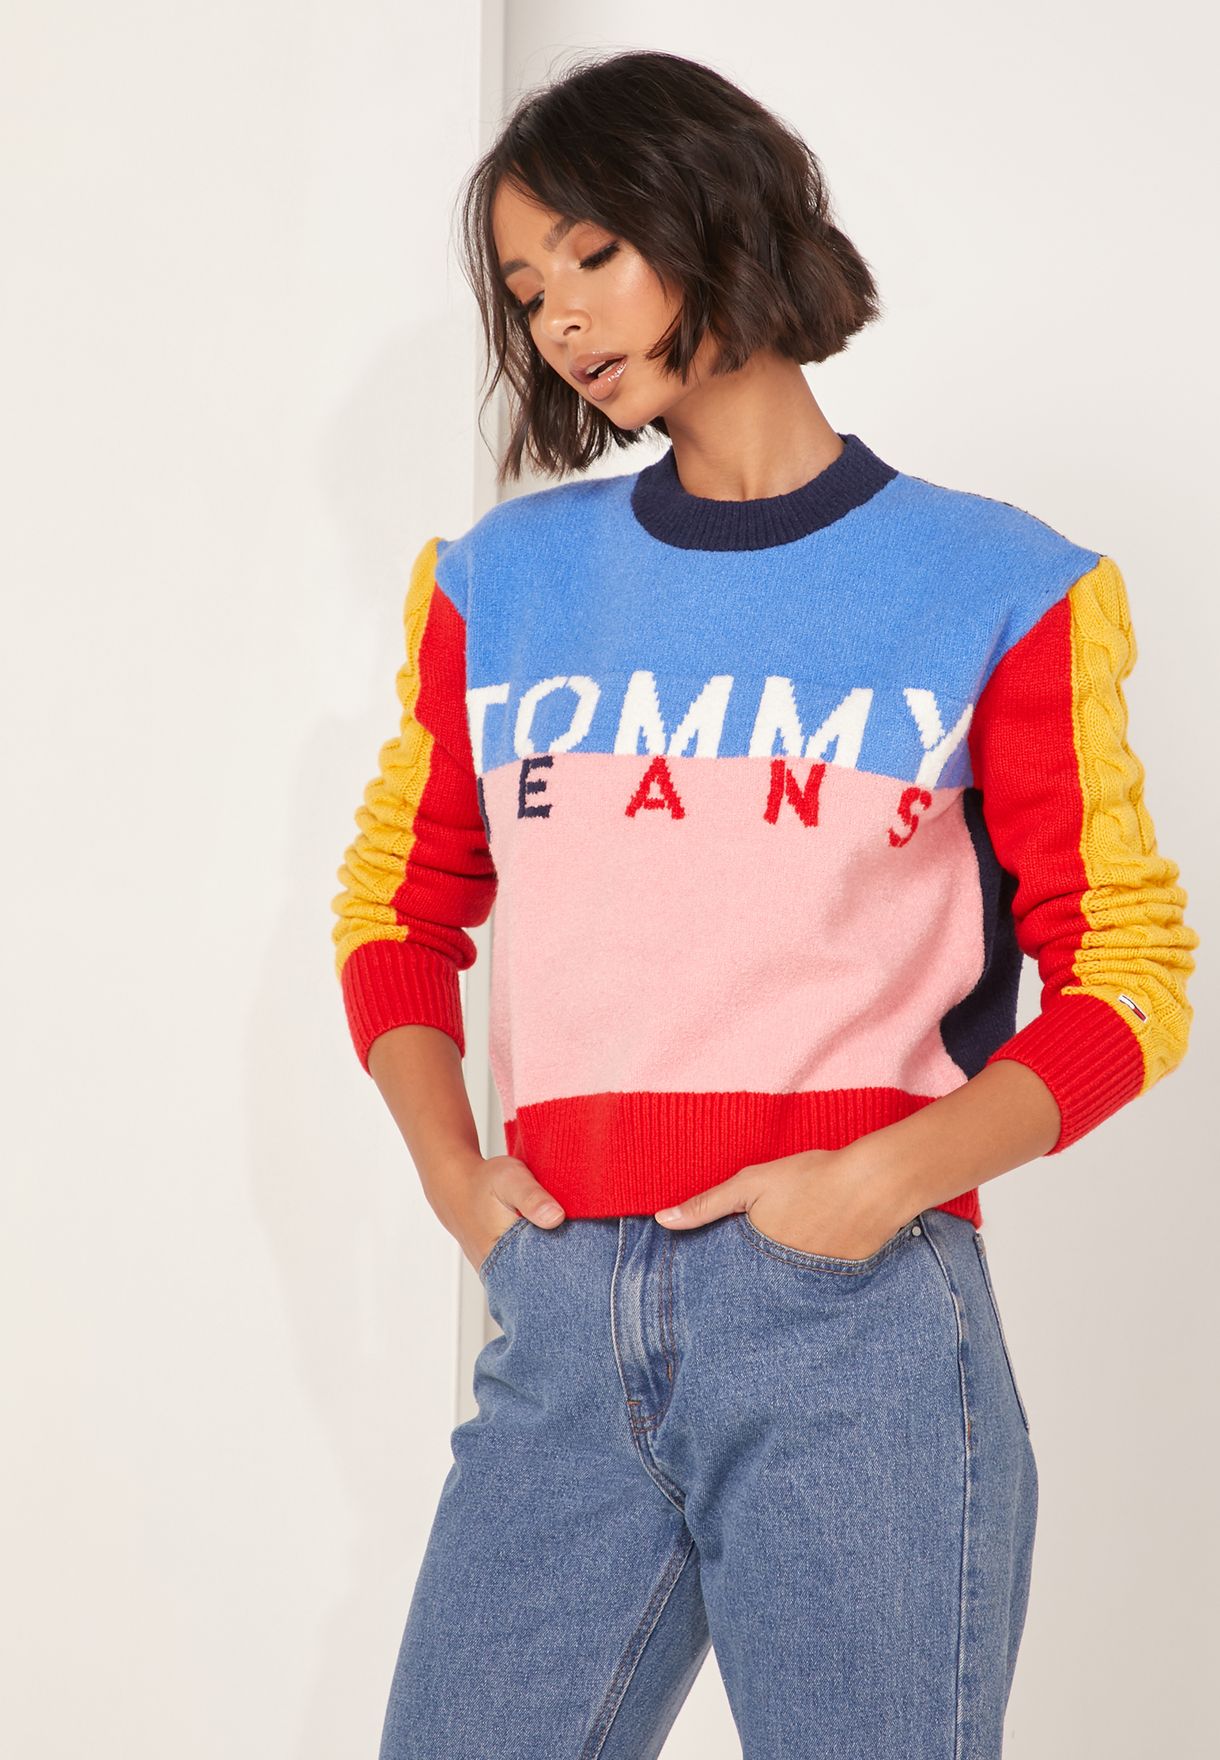 tommy jeans multicolor